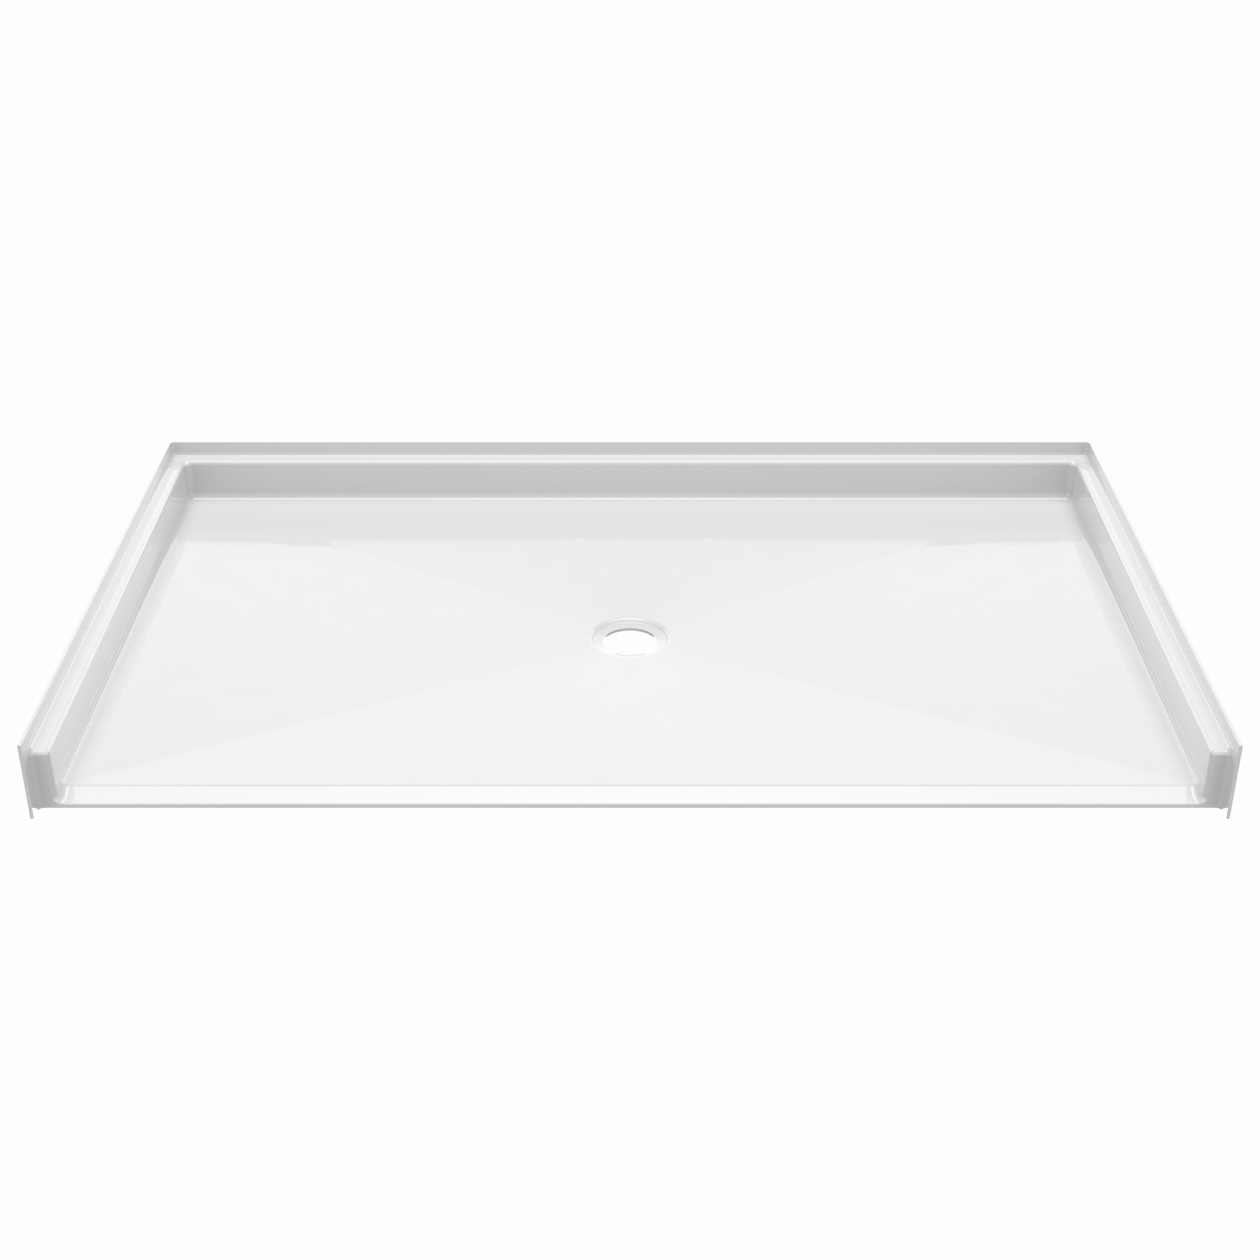 Roll-in Wheelchair Accessible Shower Bases - RBSP 6238 BF .75 C ADA 1 |